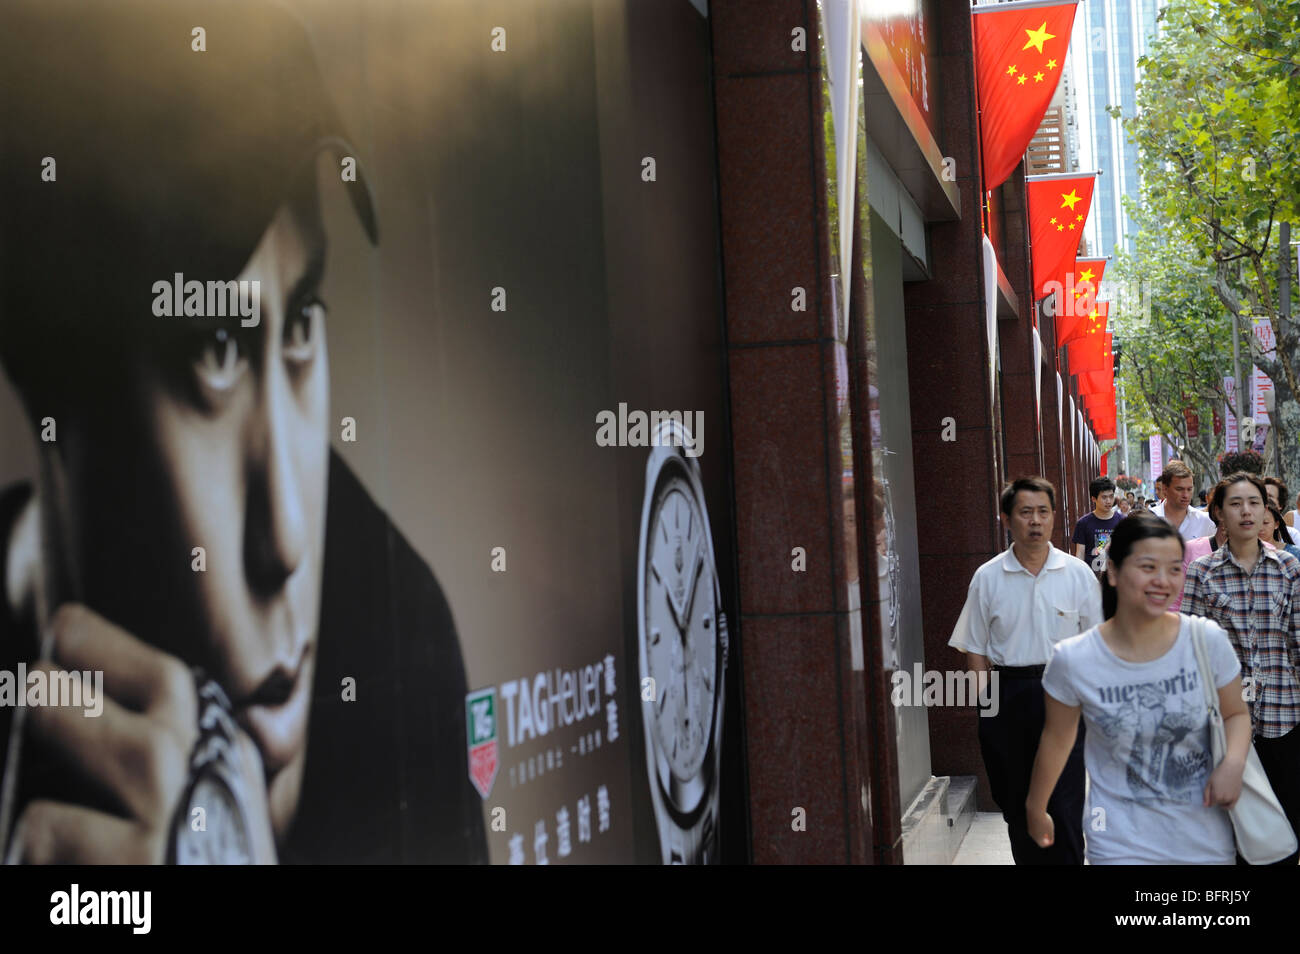 Image of American golfer Tiger Woods on a western product billboard face  Chinese people in Shanghai, China. Stock Photo